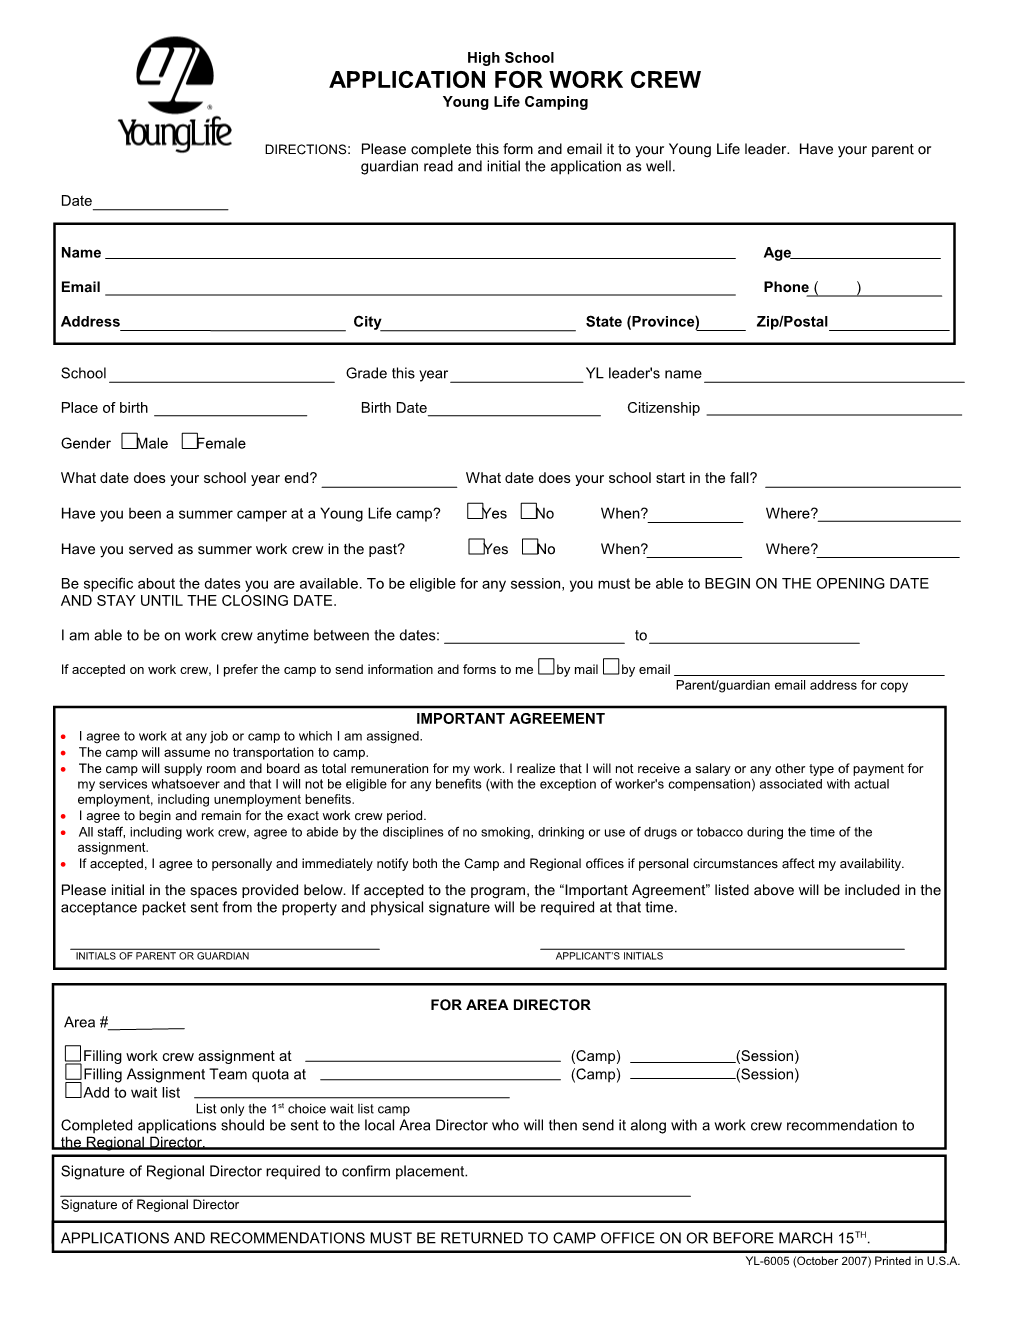 Application for Work Crew